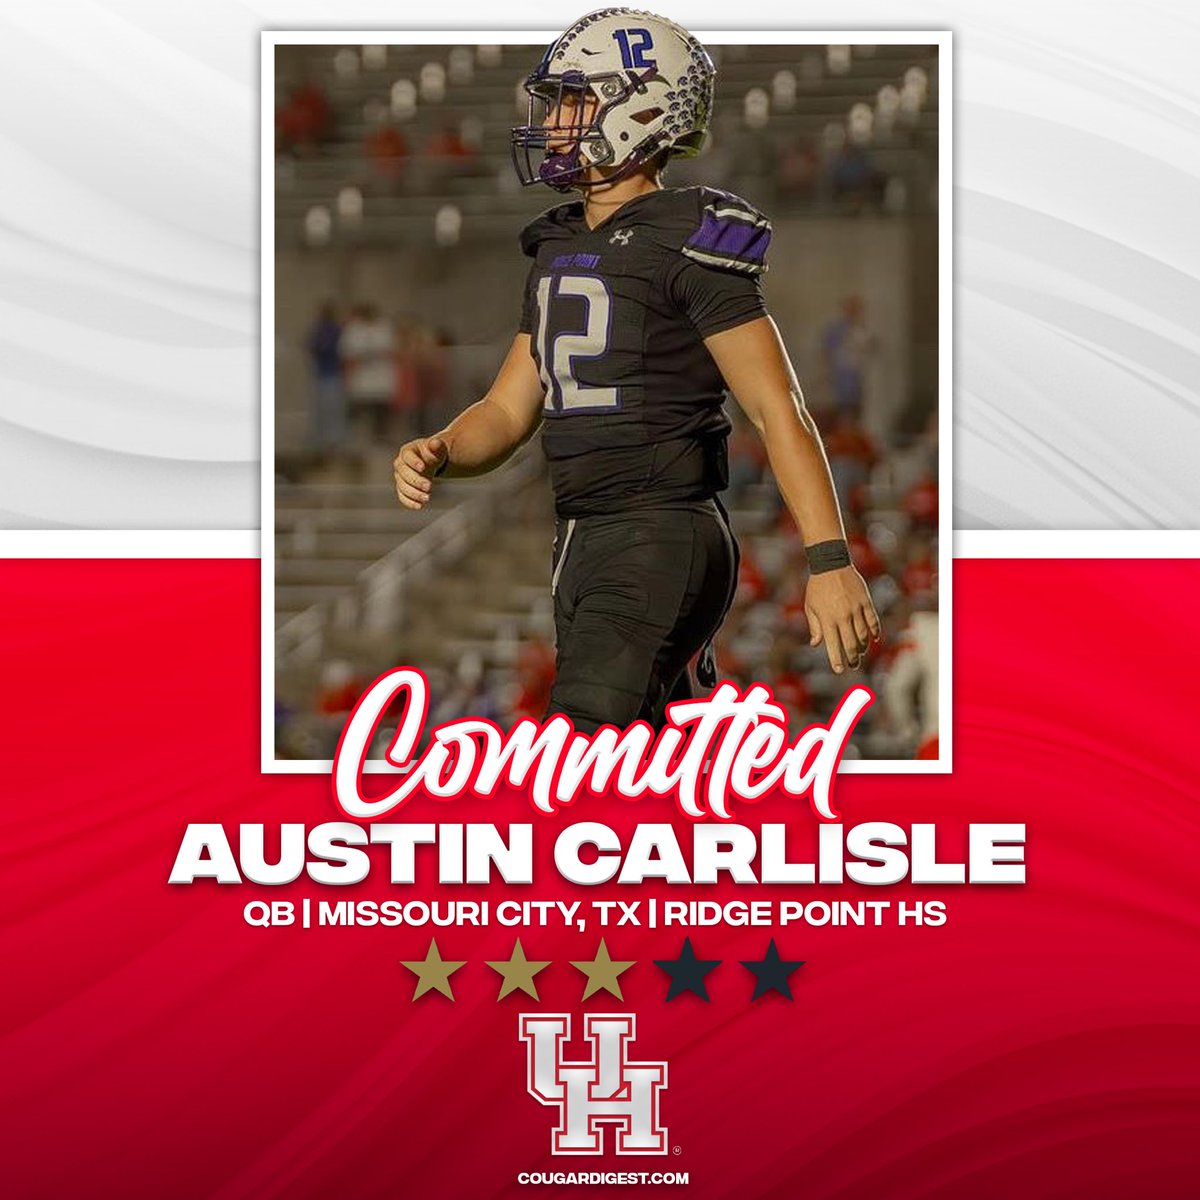 🚨COMMITMENT ALERT🚨 2025 3⭐️ QB Austin Carlisle (@AustinCarlisle_) has committed to Houston! He is the 51st ranked QB in the 2025 class according to @247Sports 247sports.com/player/austin-…